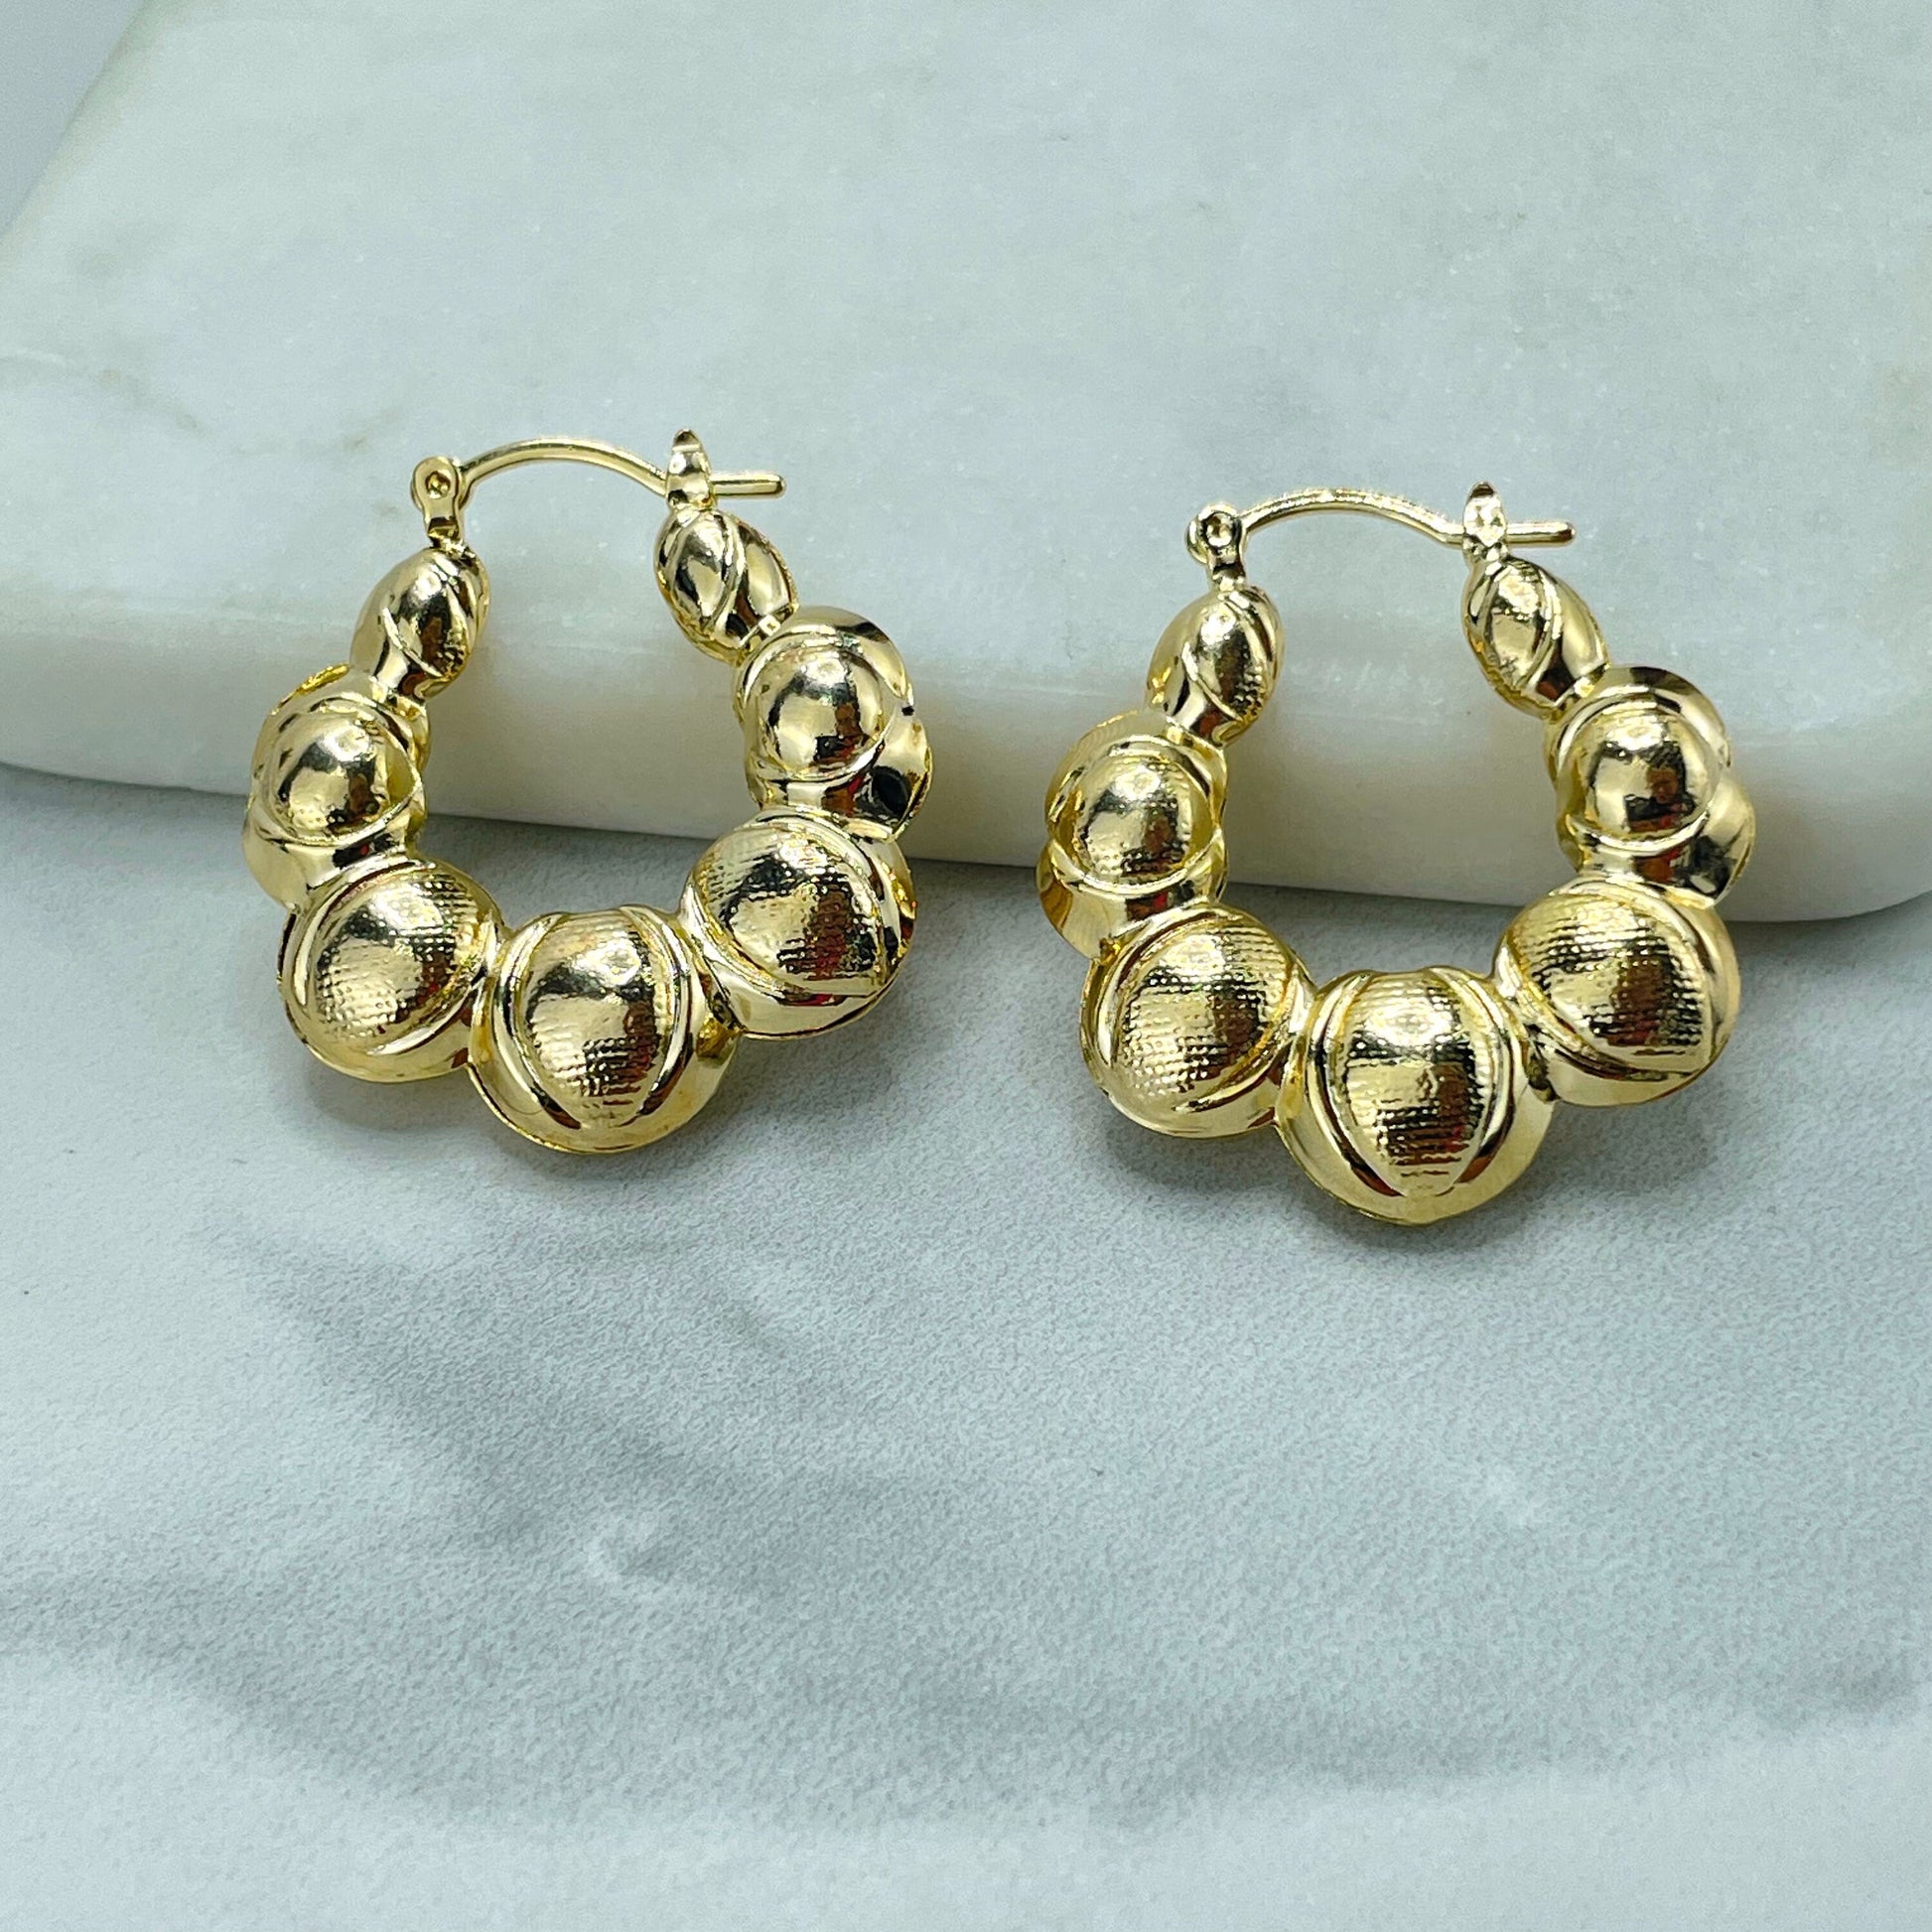 18k Gold Filled 33mm Croissant Inspiration Ball Design Hoops Earrings in Gold or Two Tones Colors, Wholesale Jewelry Making Supplies